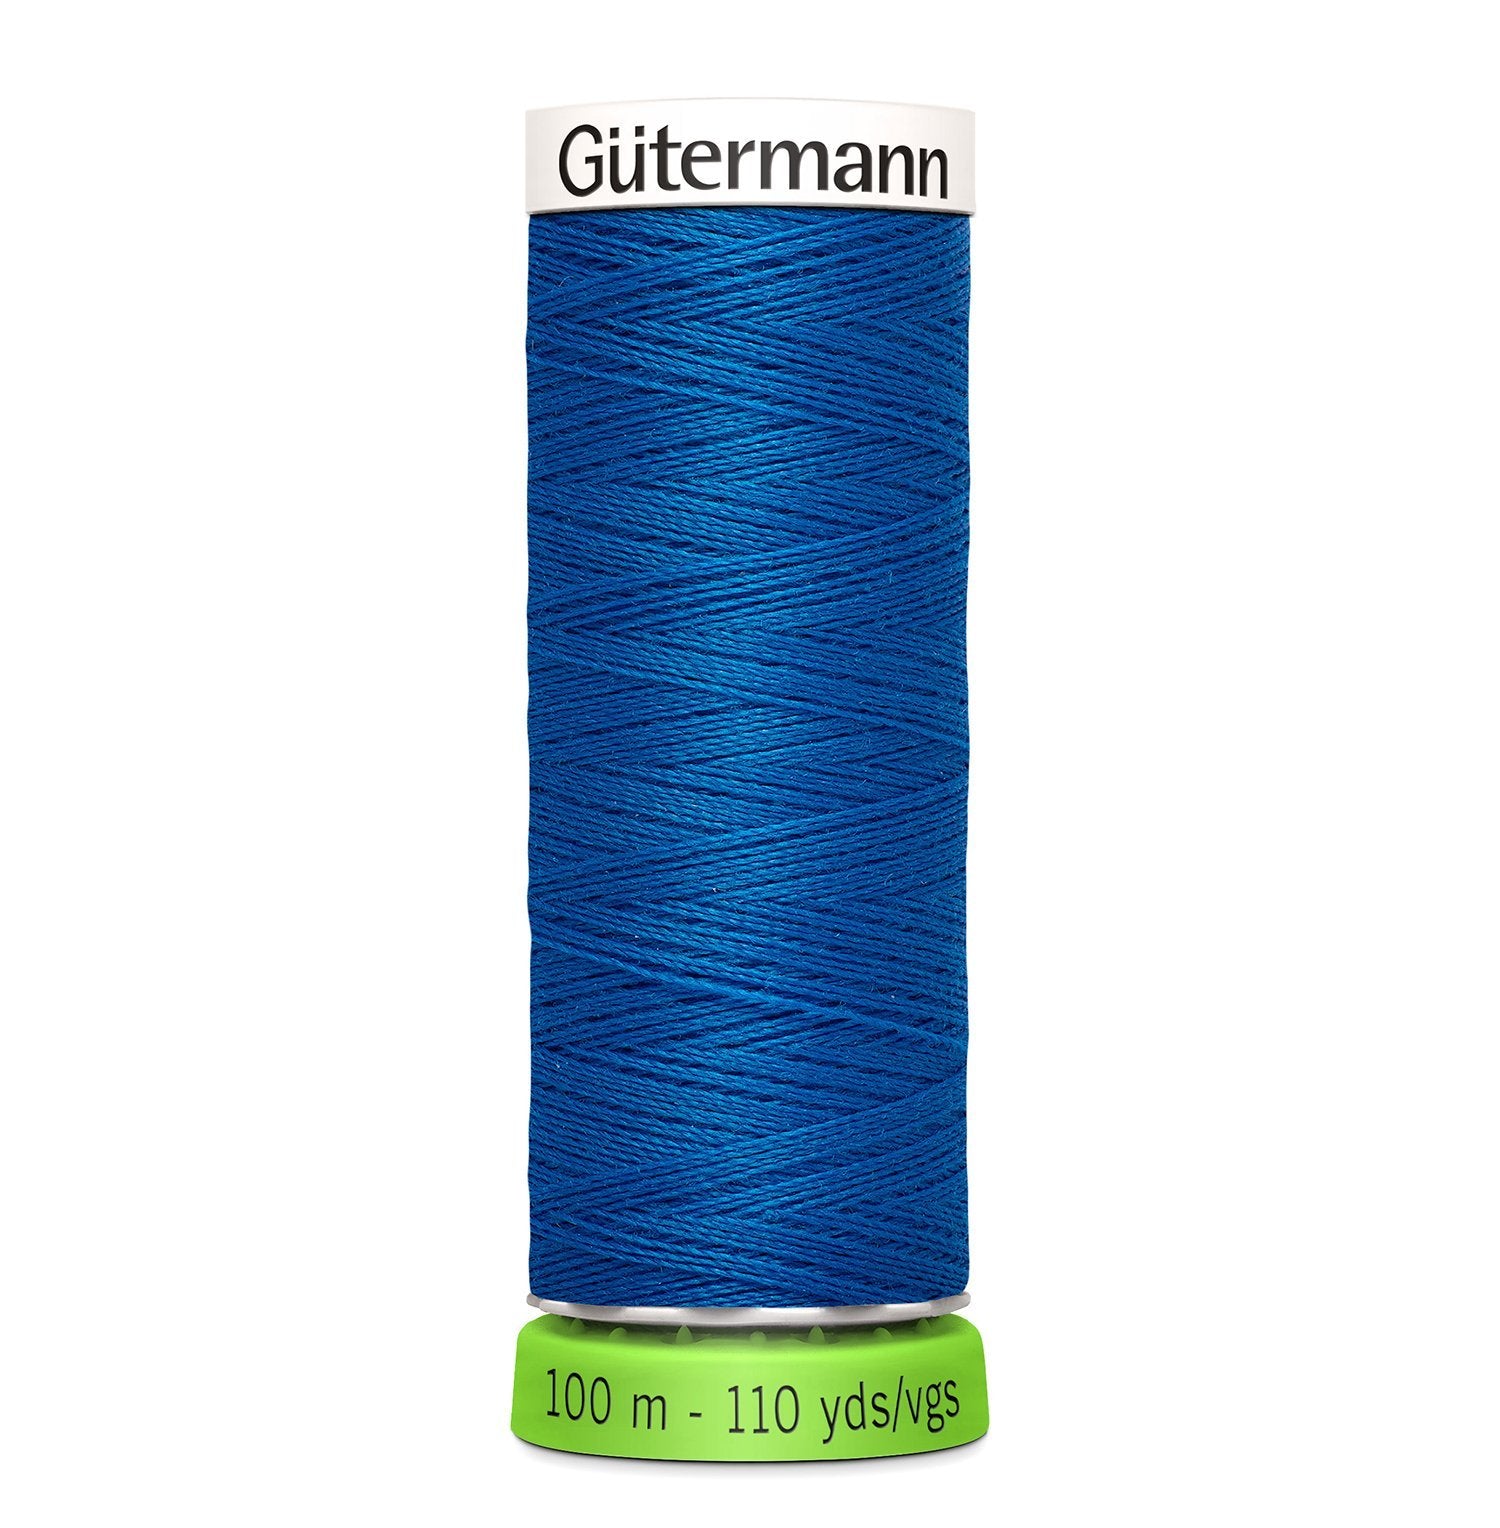 Gutermann Recycled Thread 100m, Colour 322 from Jaycotts Sewing Supplies